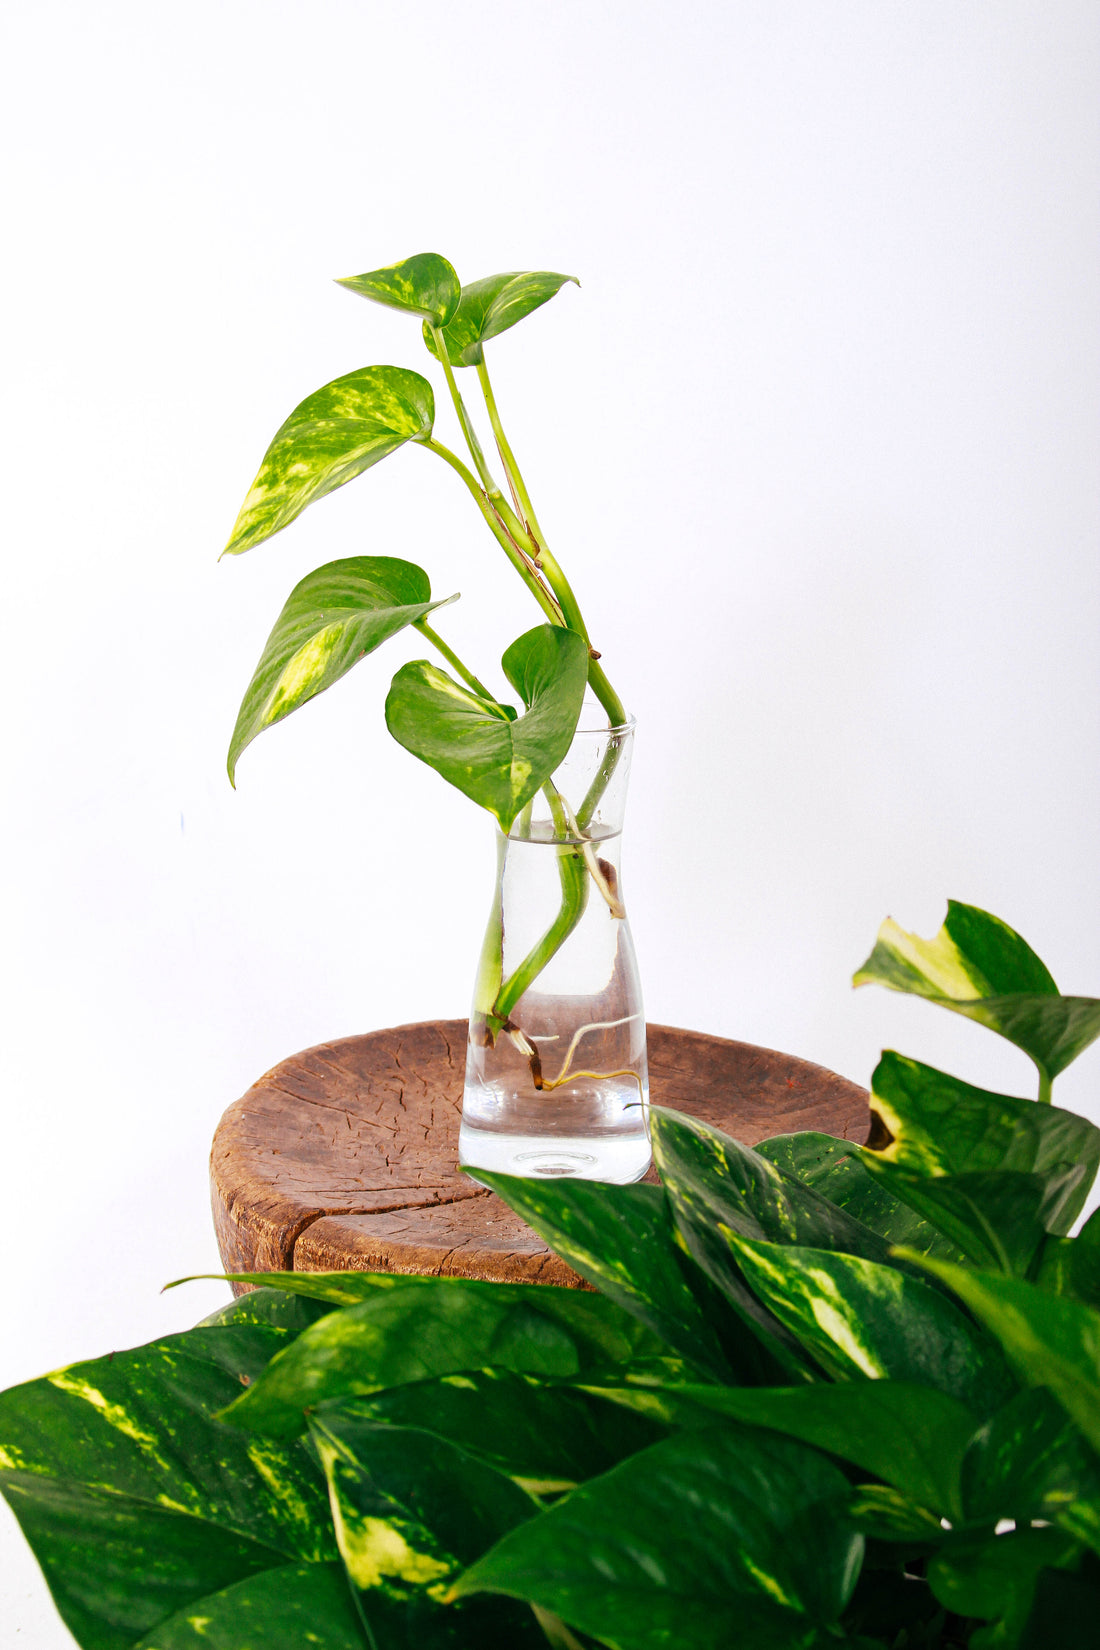 A propagated stem cutting from a Pothos plant is growing roots inside a glass of water.